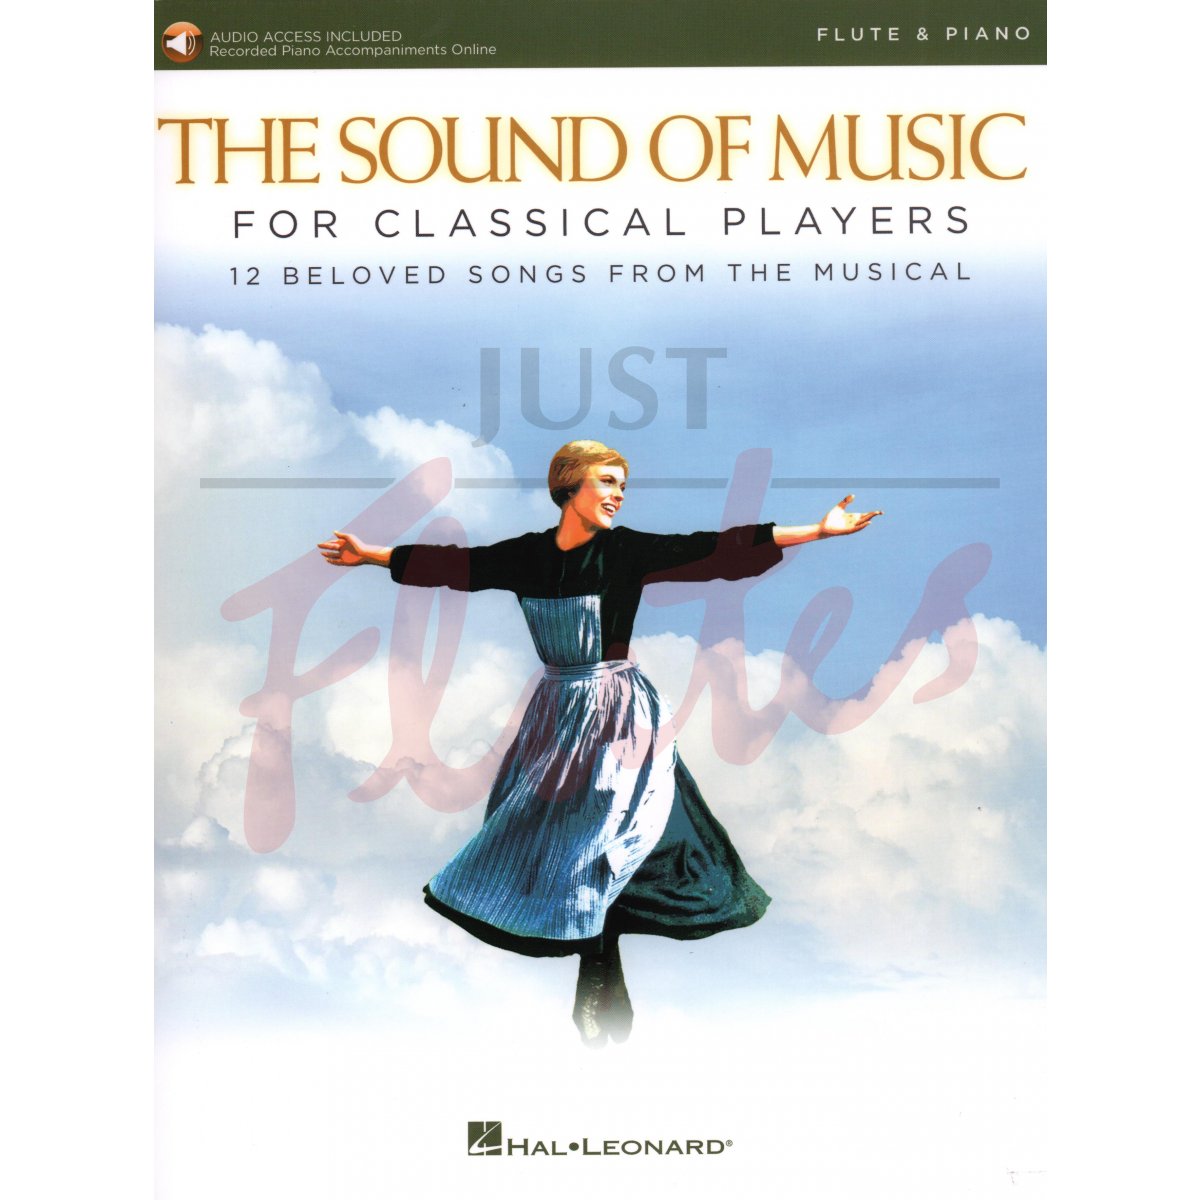 The Sound of Music for Classical Players for Flute and Piano